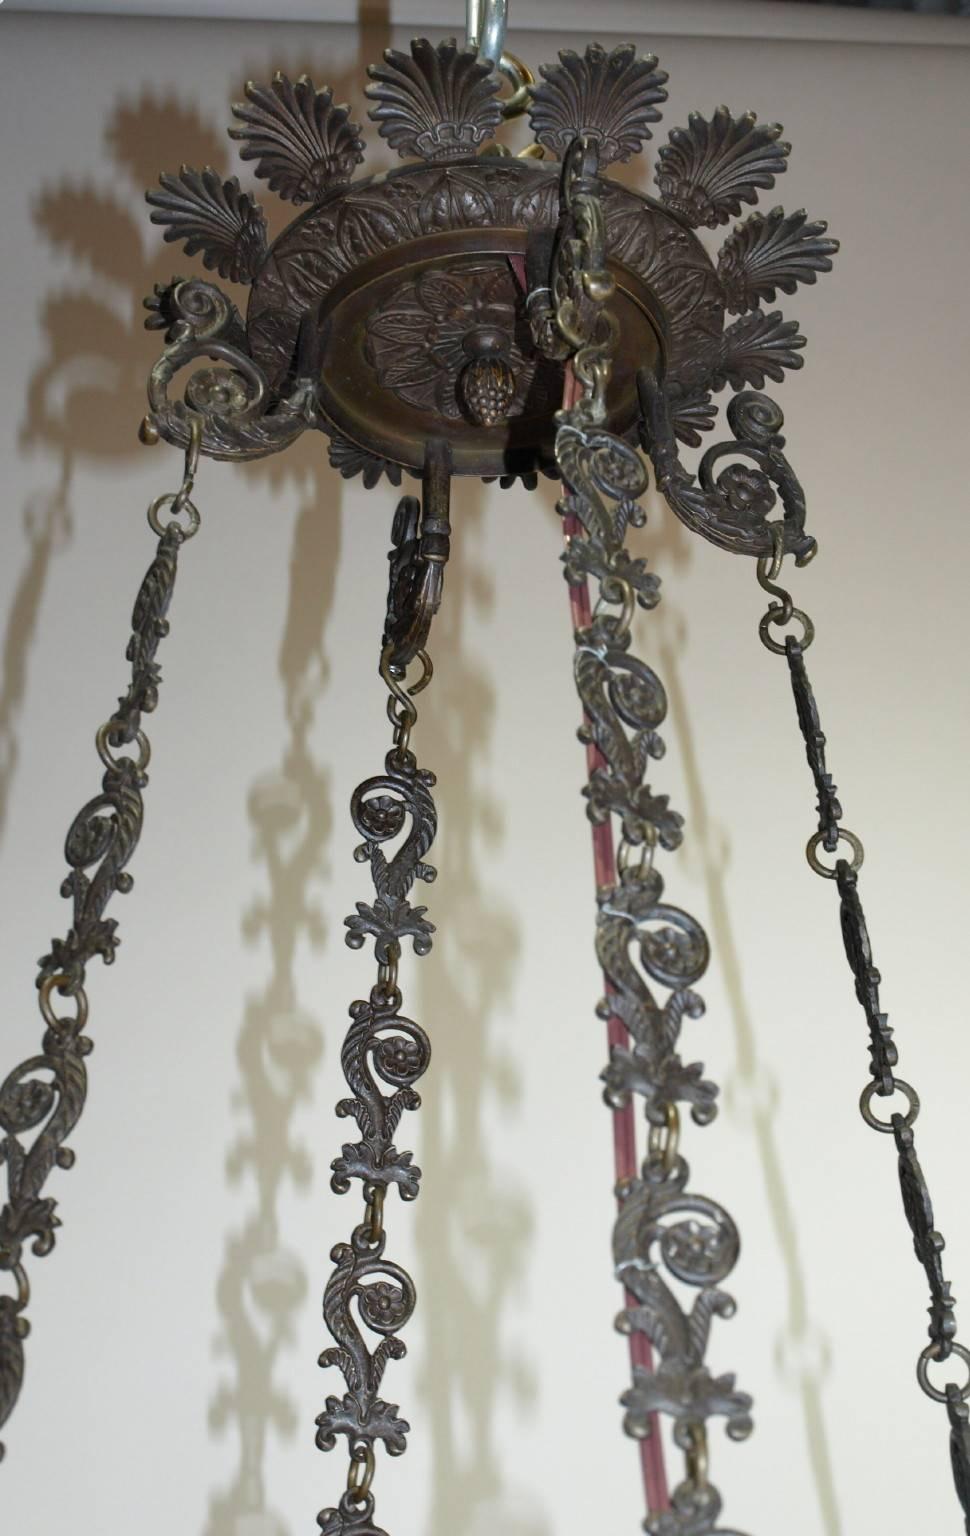 Superb quality eight-light Empire style bronze chandelier, exquisite detail. Originally for candles, now electrified.